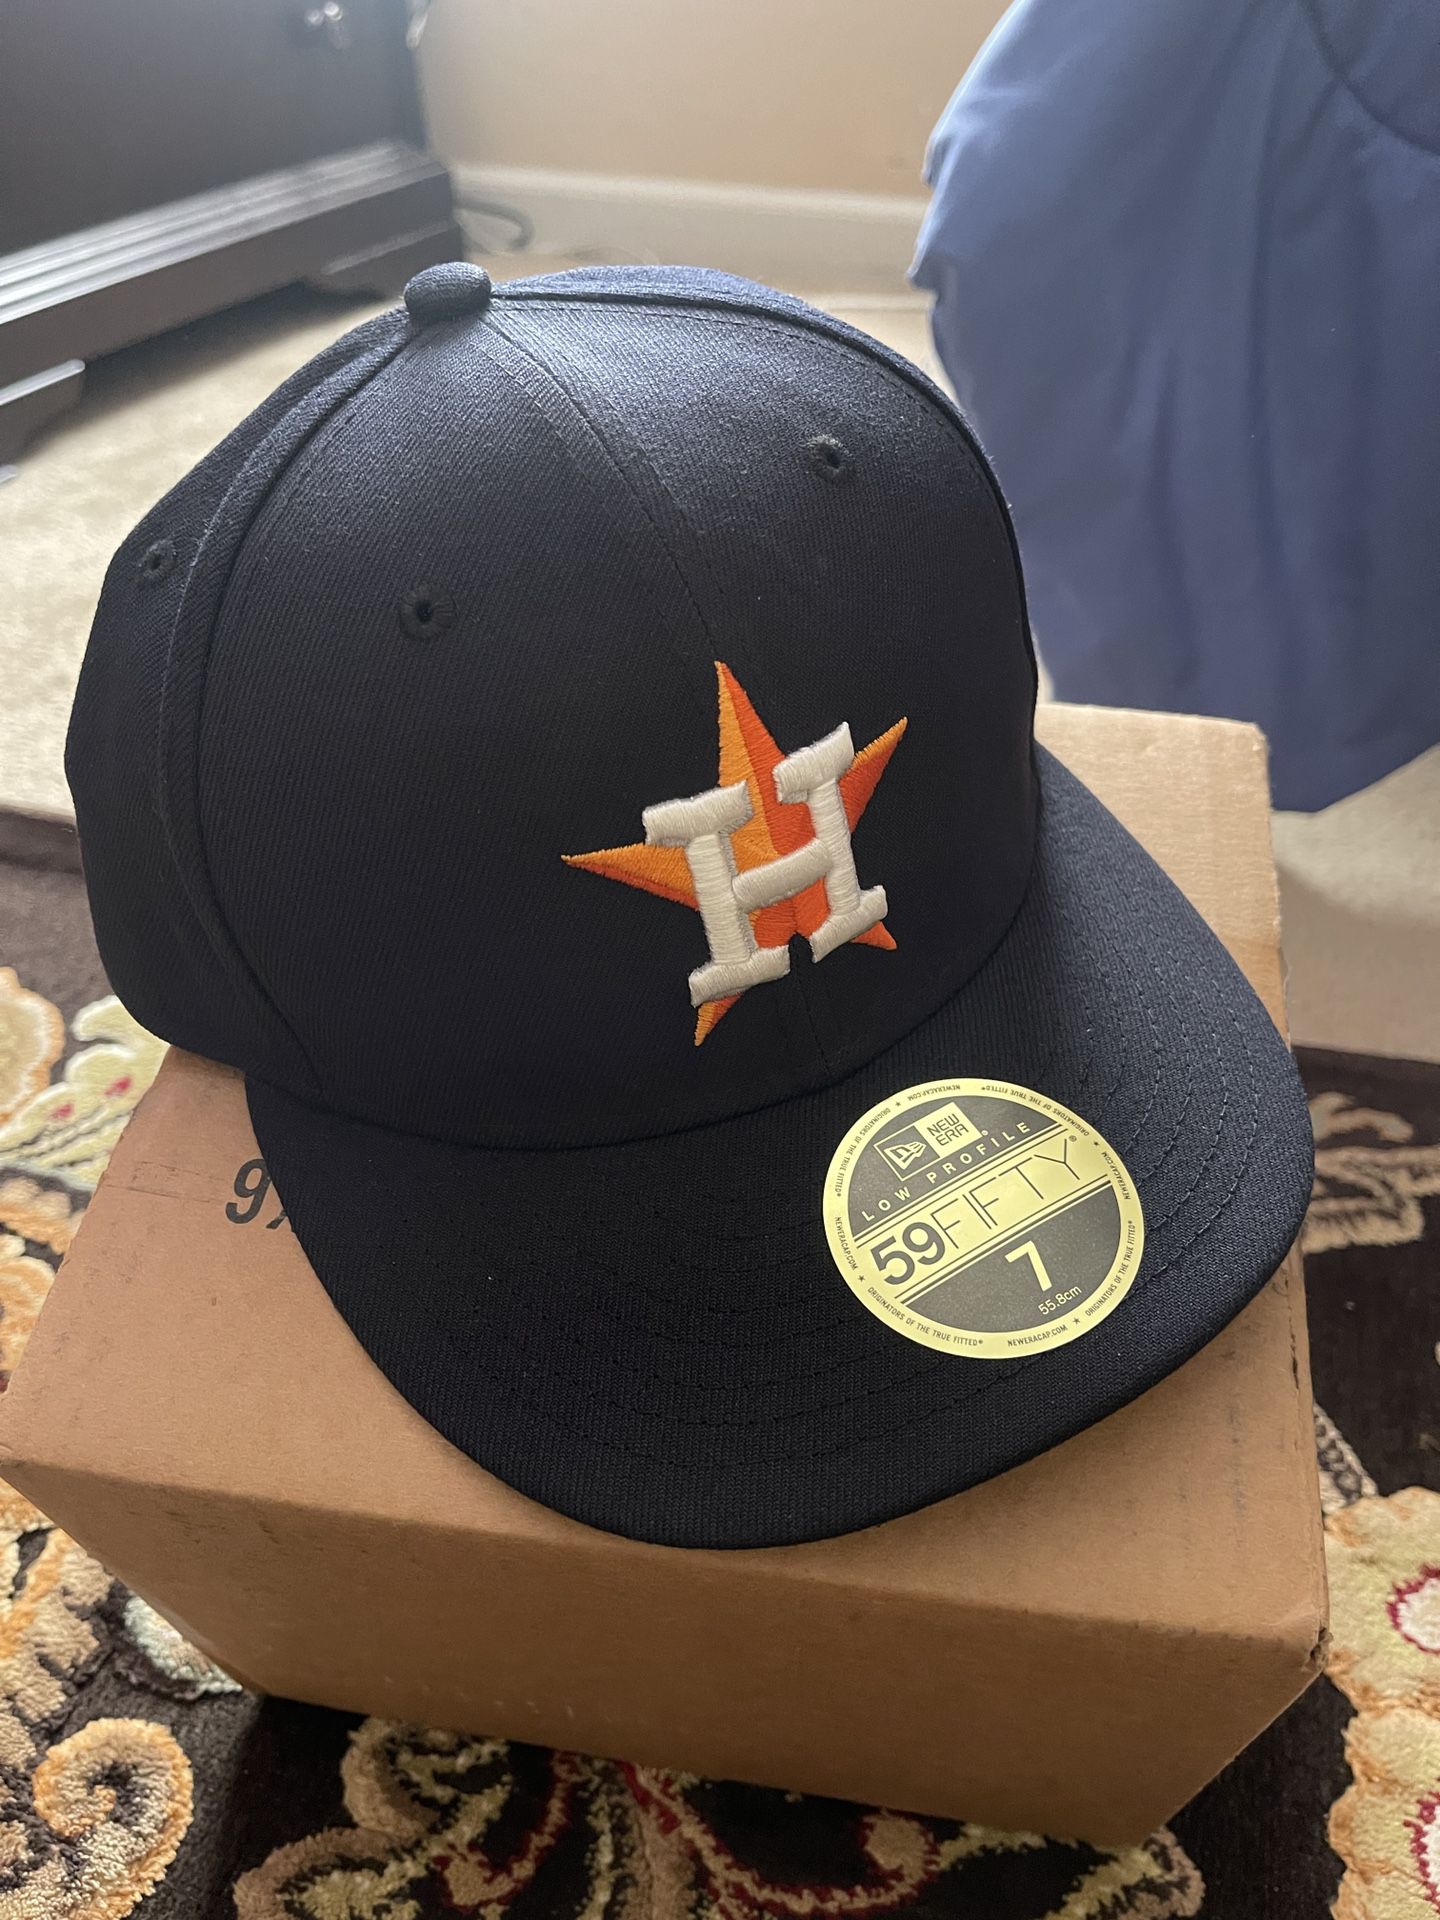 MLB Houston Astros (Size 7 Hats) NEW for Sale in Reno, NV - OfferUp